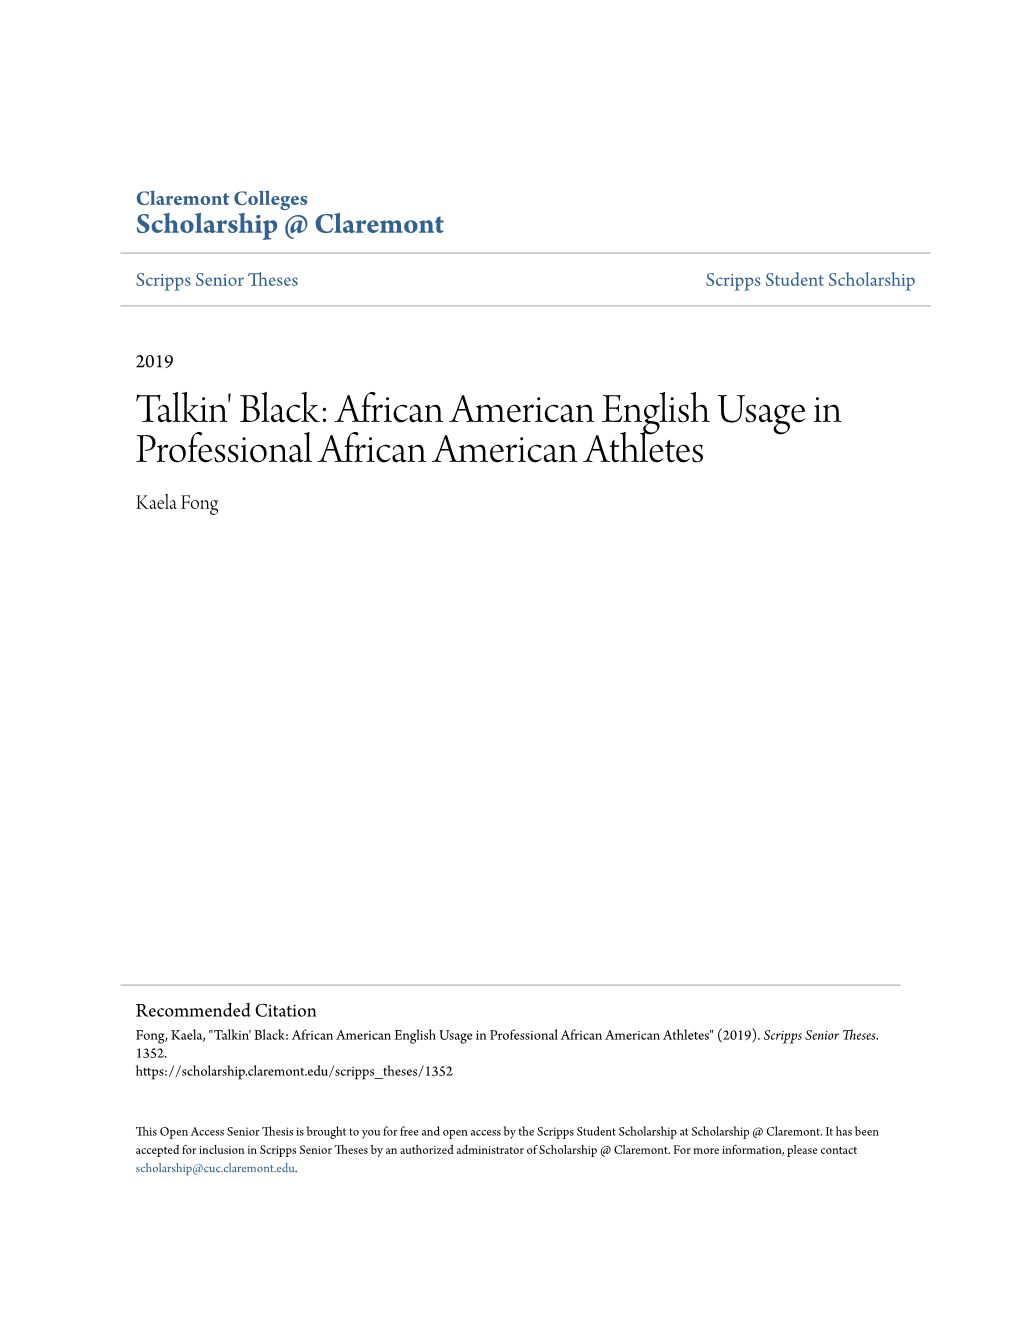 African American English Usage in Professional African American Athletes Kaela Fong